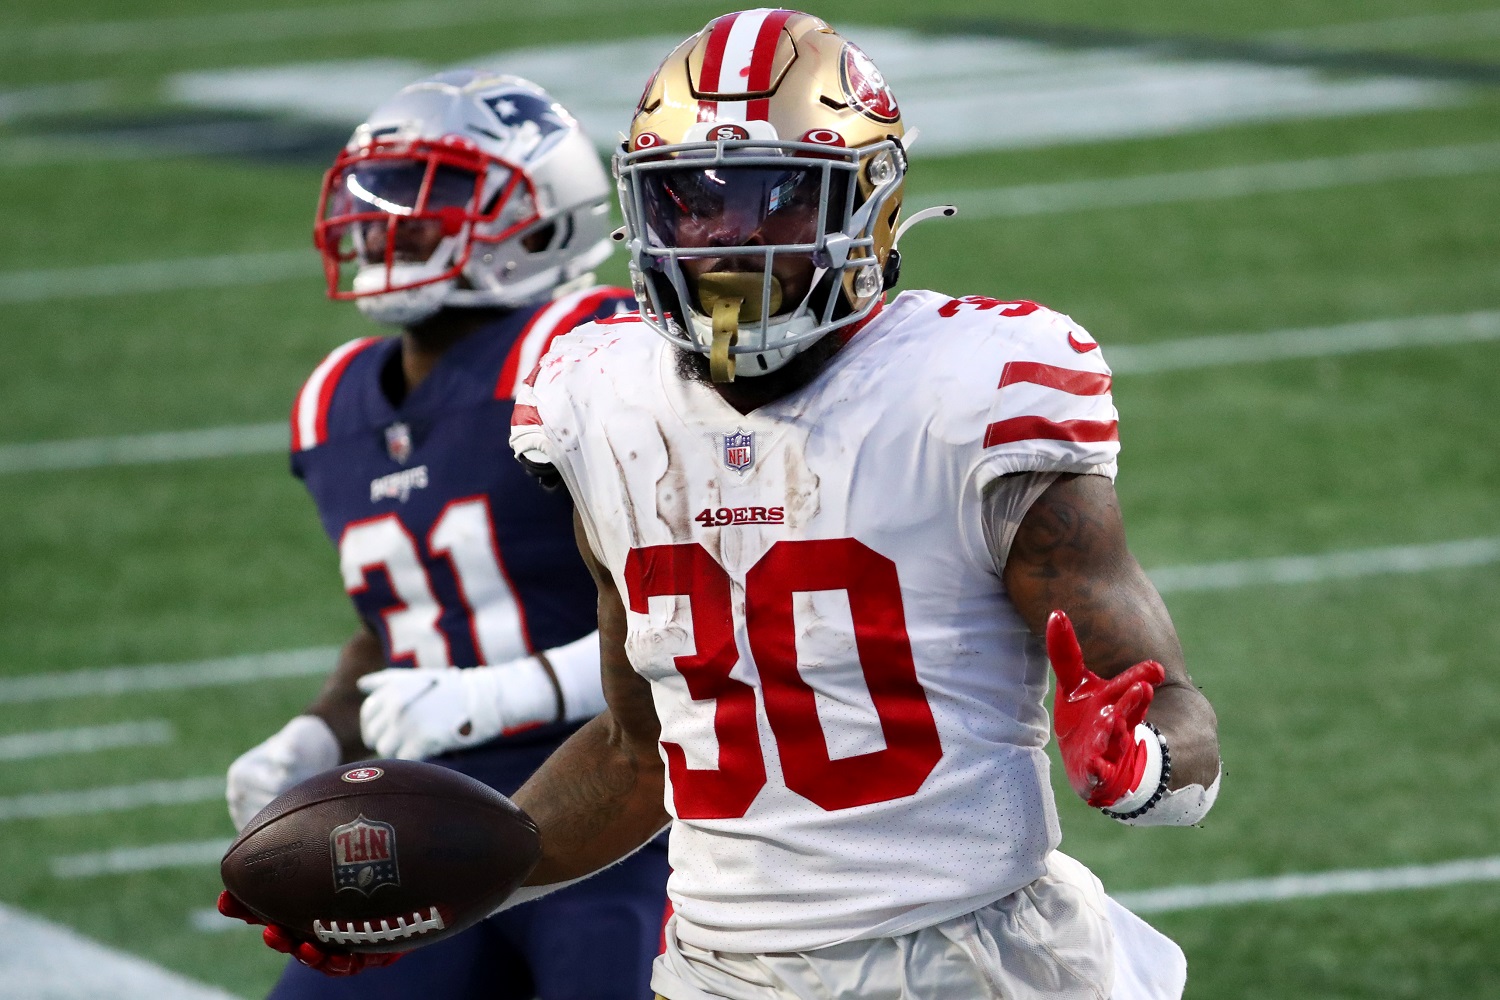 Jeff Wilson Jr. scored 10 touchdowns in his third NFL season with the NFL's San Francisco 49ers. | Maddie Meyer/Getty Images)